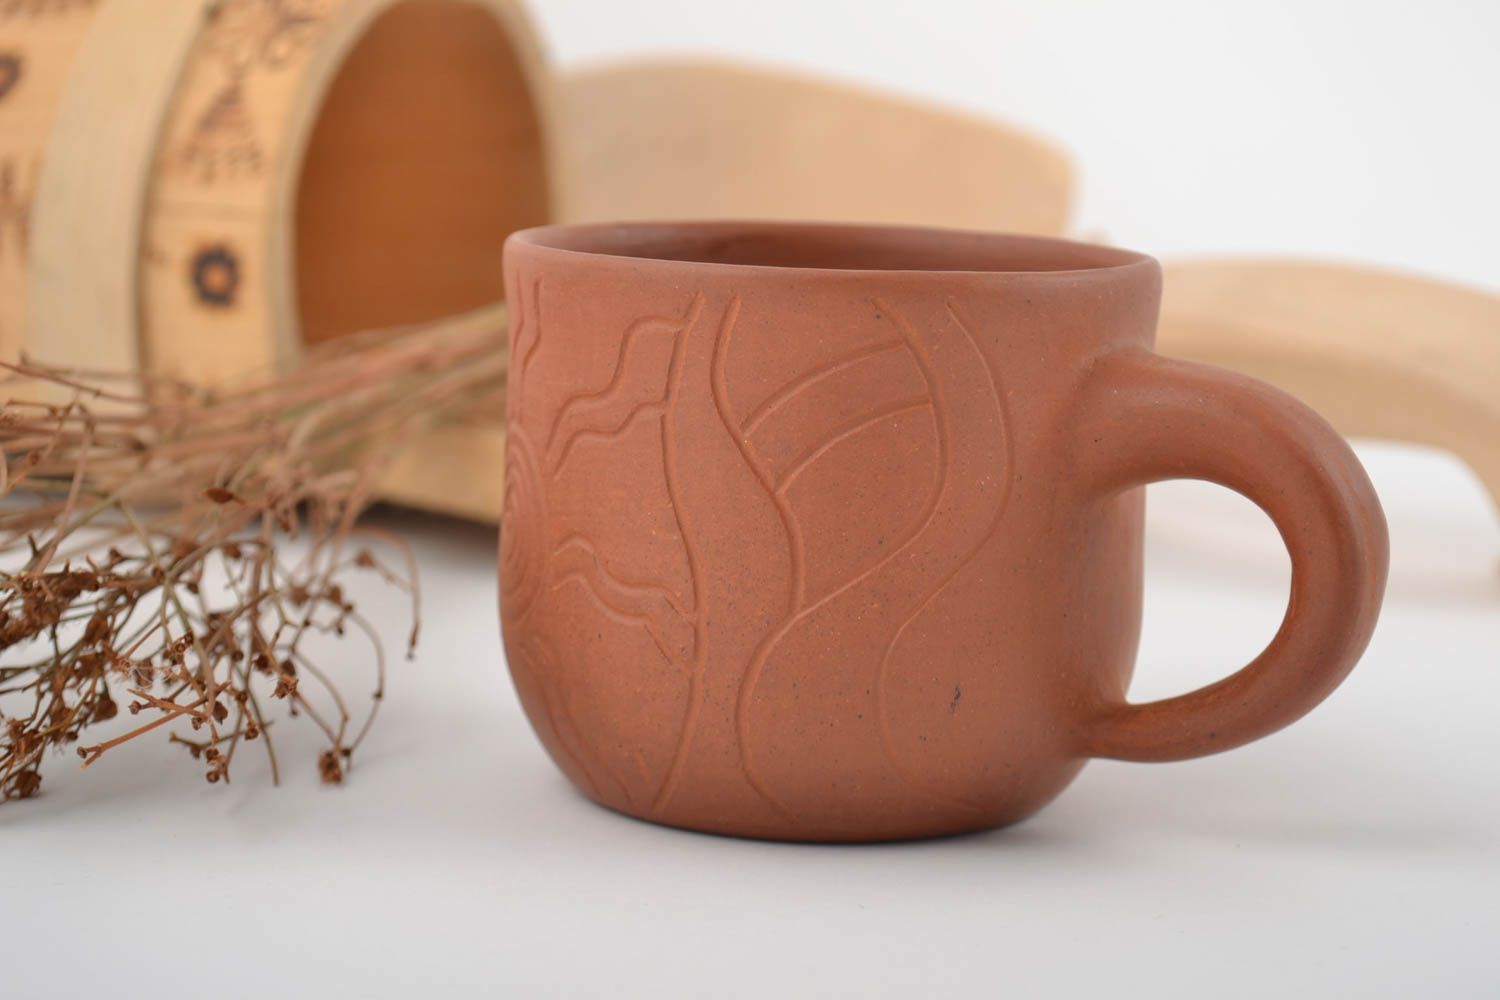 Ceramic cup with carved cave drawings' pattern 10 oz ml brown coffee mug photo 1